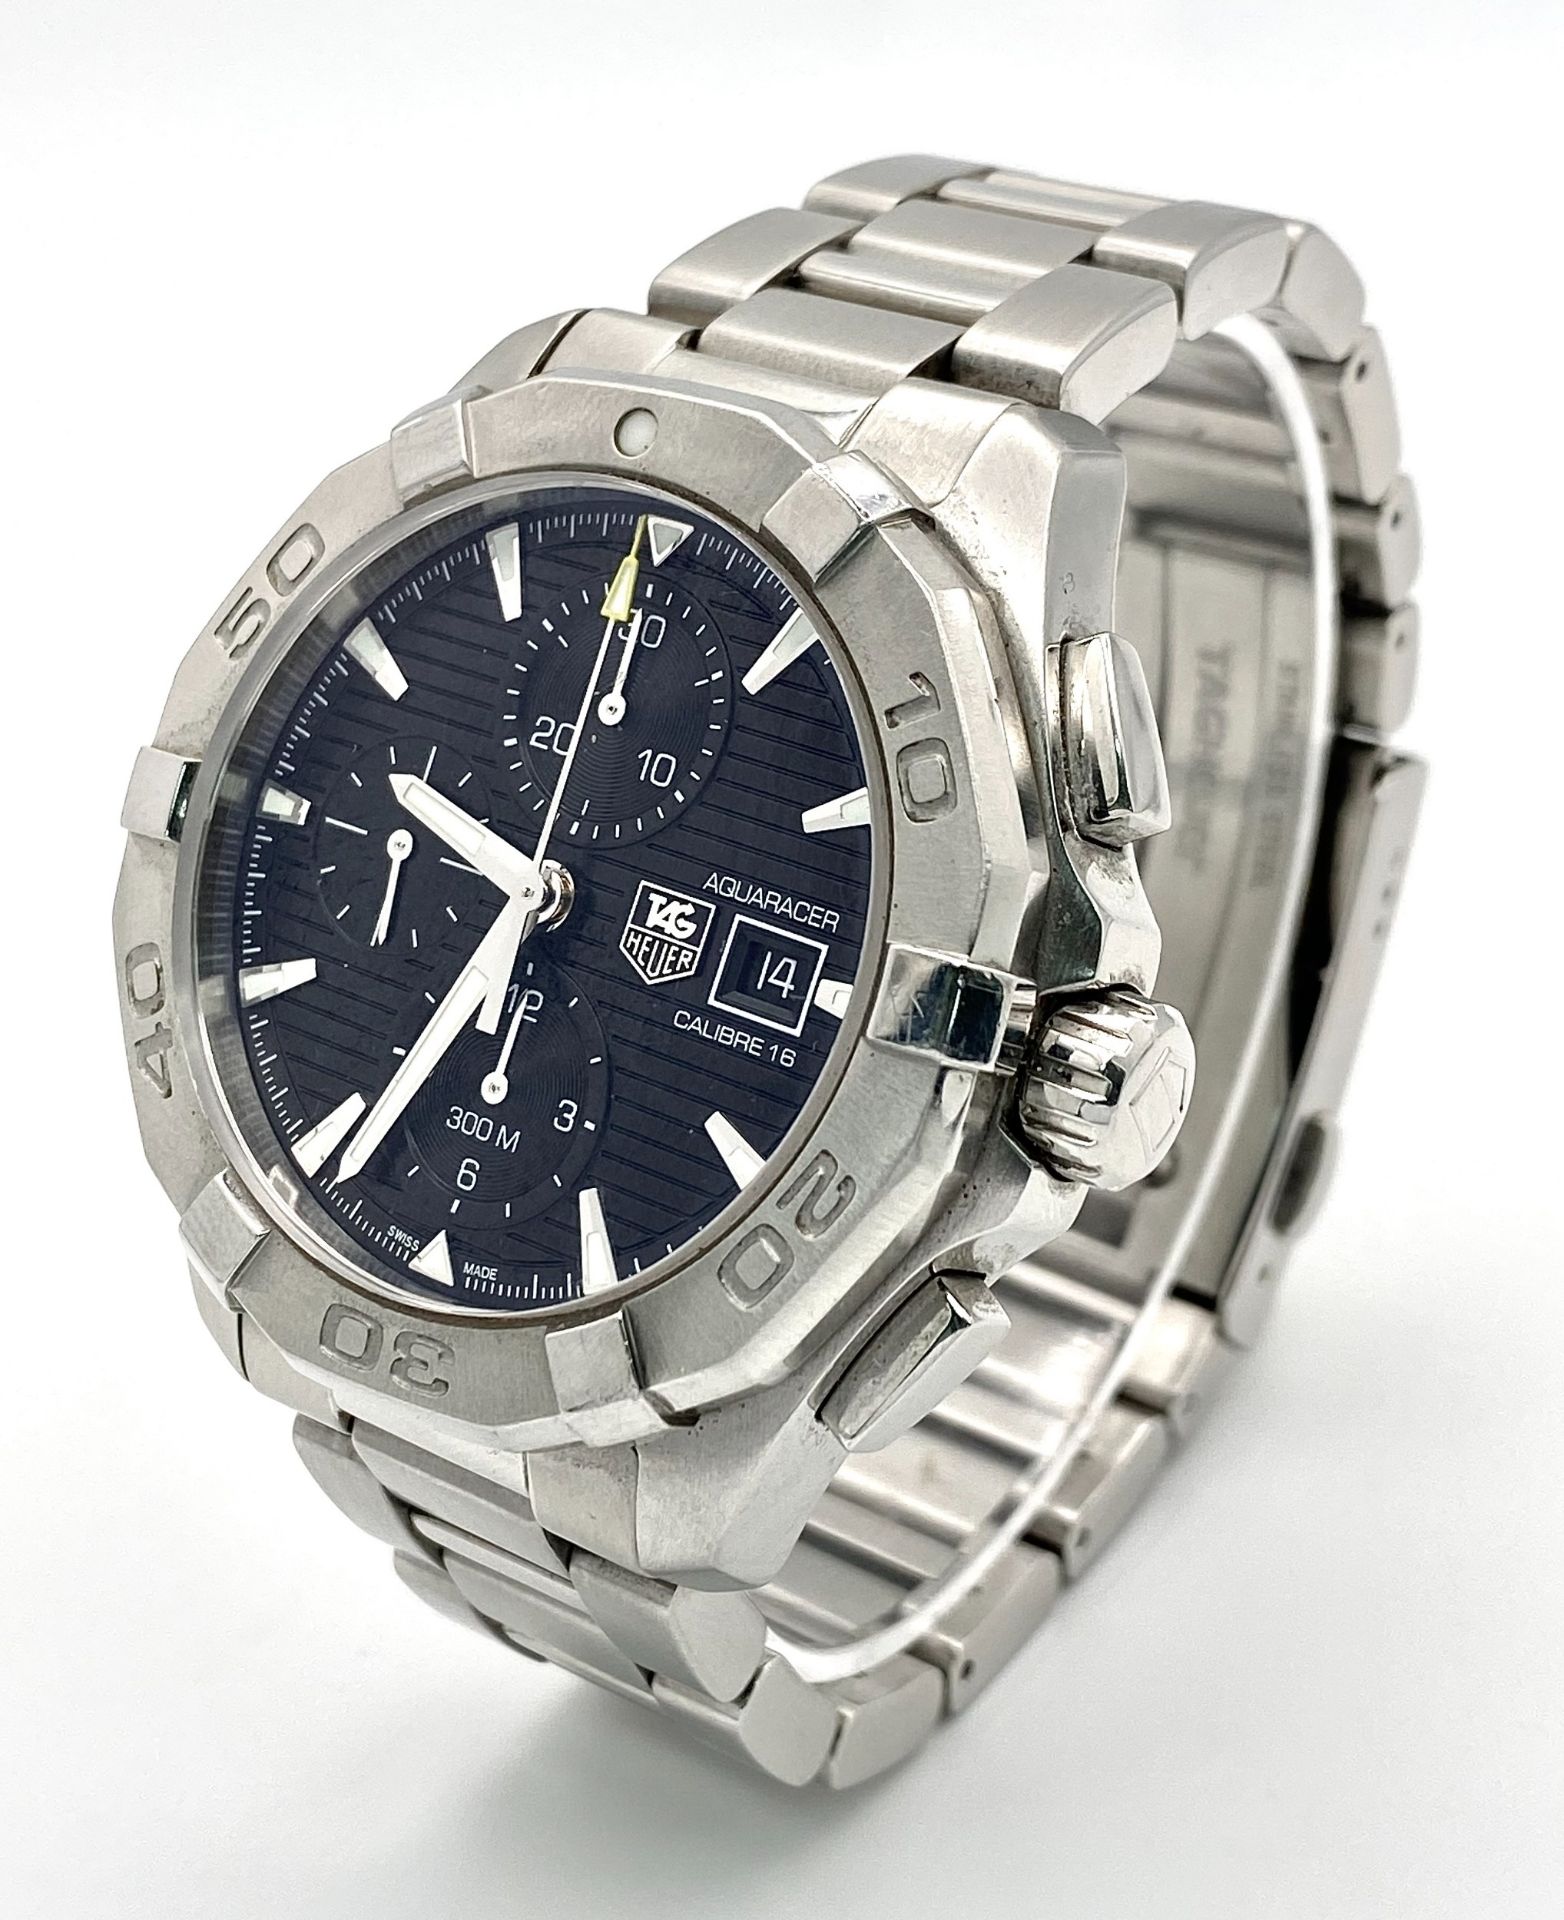 A TAG HEUER AQUARACER CALIBRE 16 AUTOMATIC GENTS WATCH - STAINLESS STEEL BRACELET AND CASE - 44MM. - Image 4 of 9